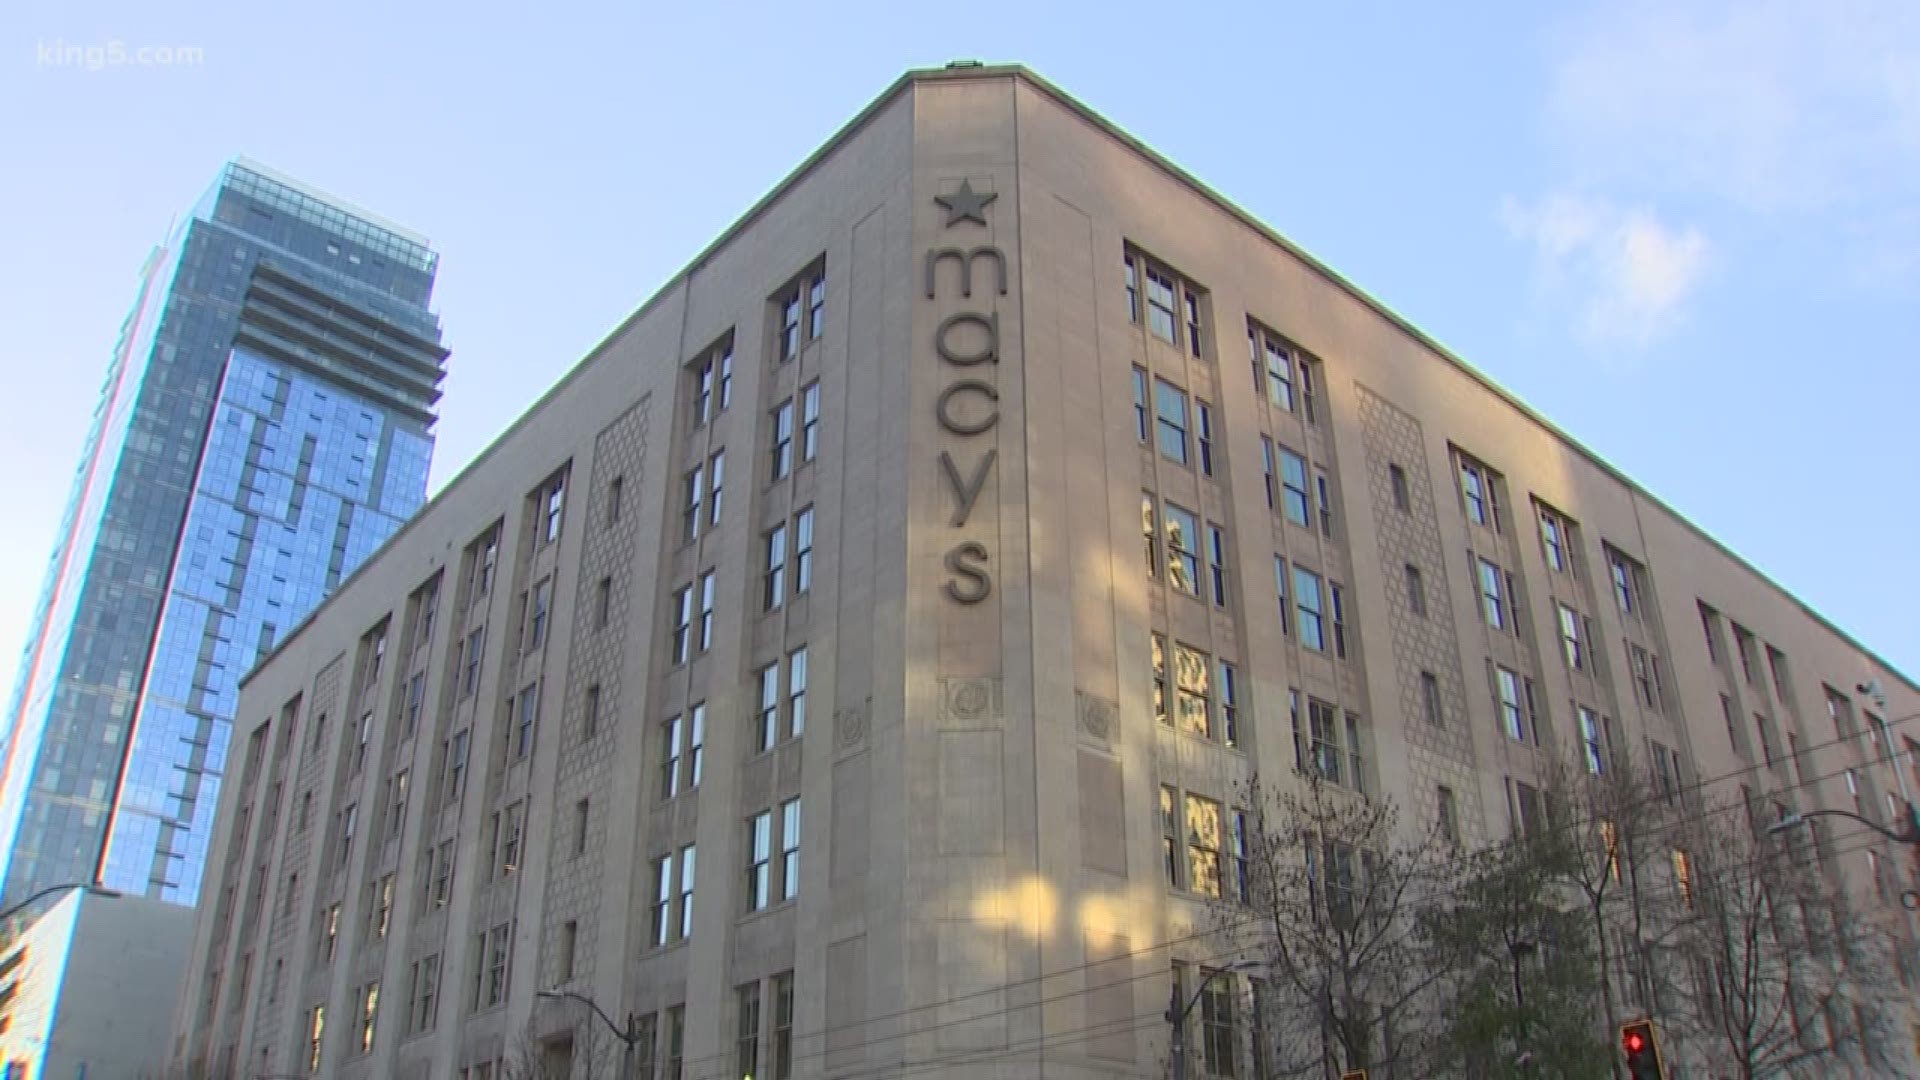 The building Macy's was in has housed a department store for the past 90 years.